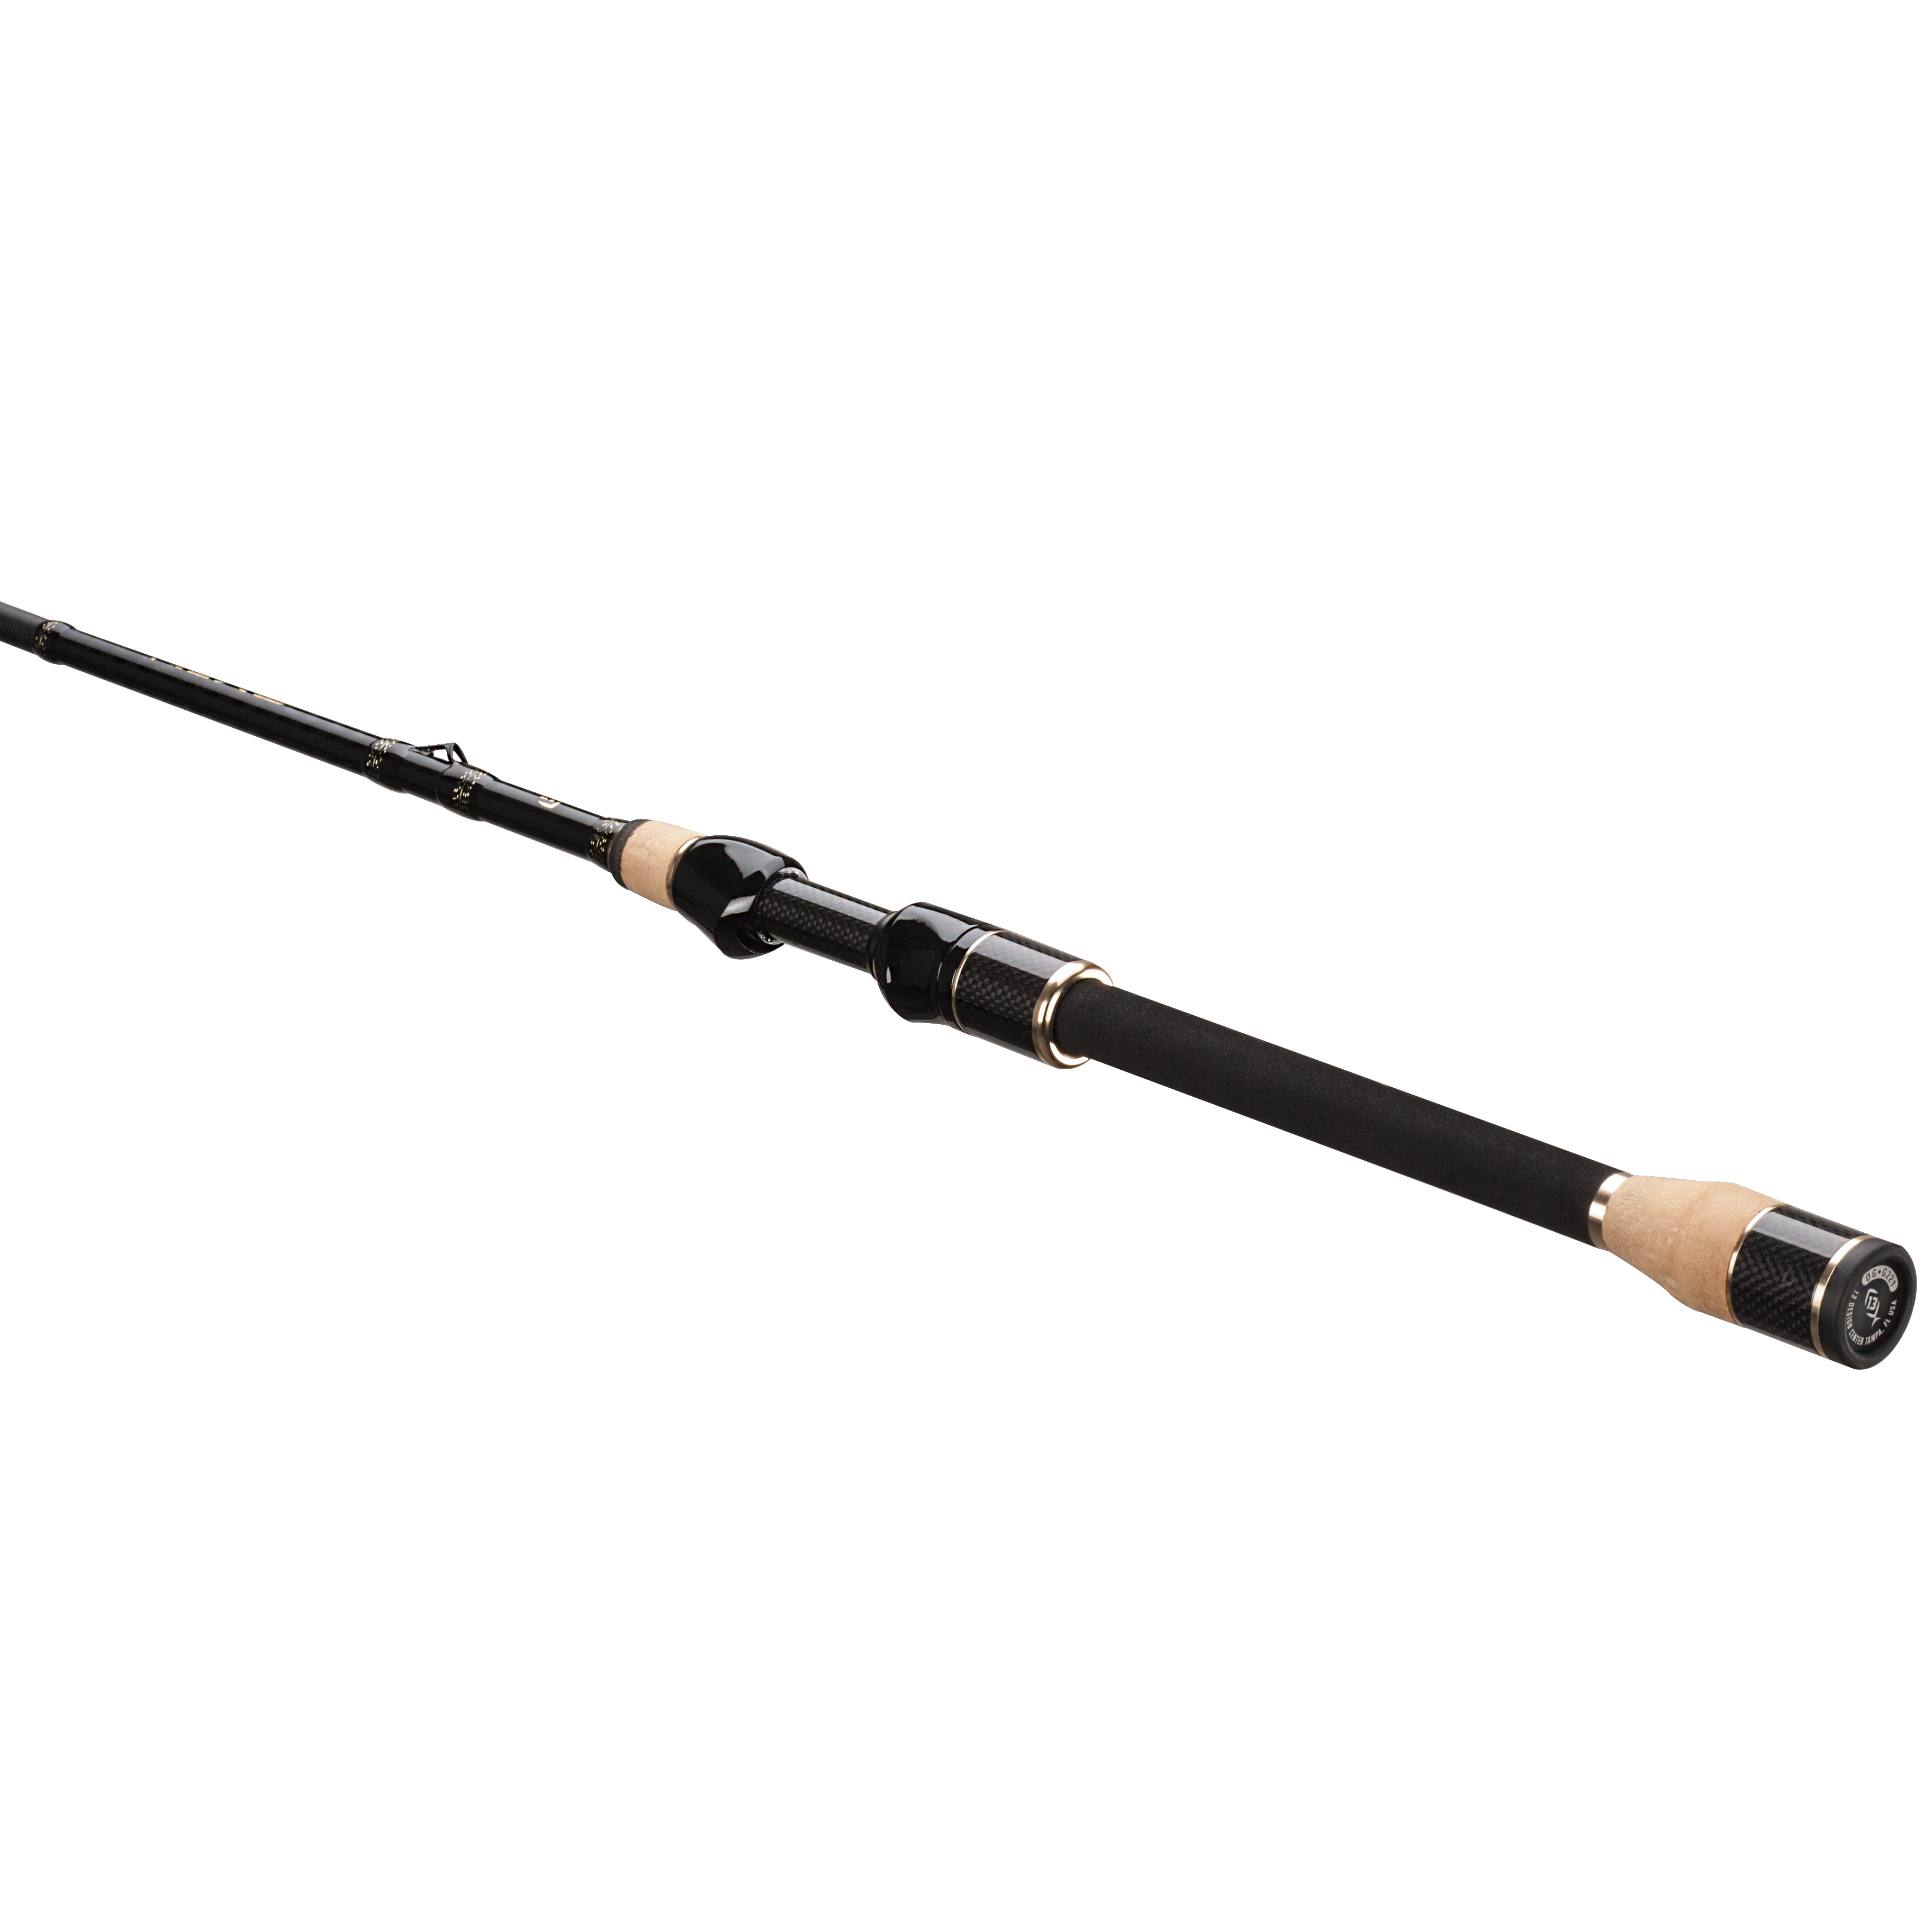 13 Fishing Omen Panfish Spinning Rods - 205877, Fishing Rods at Sportsman's  Guide